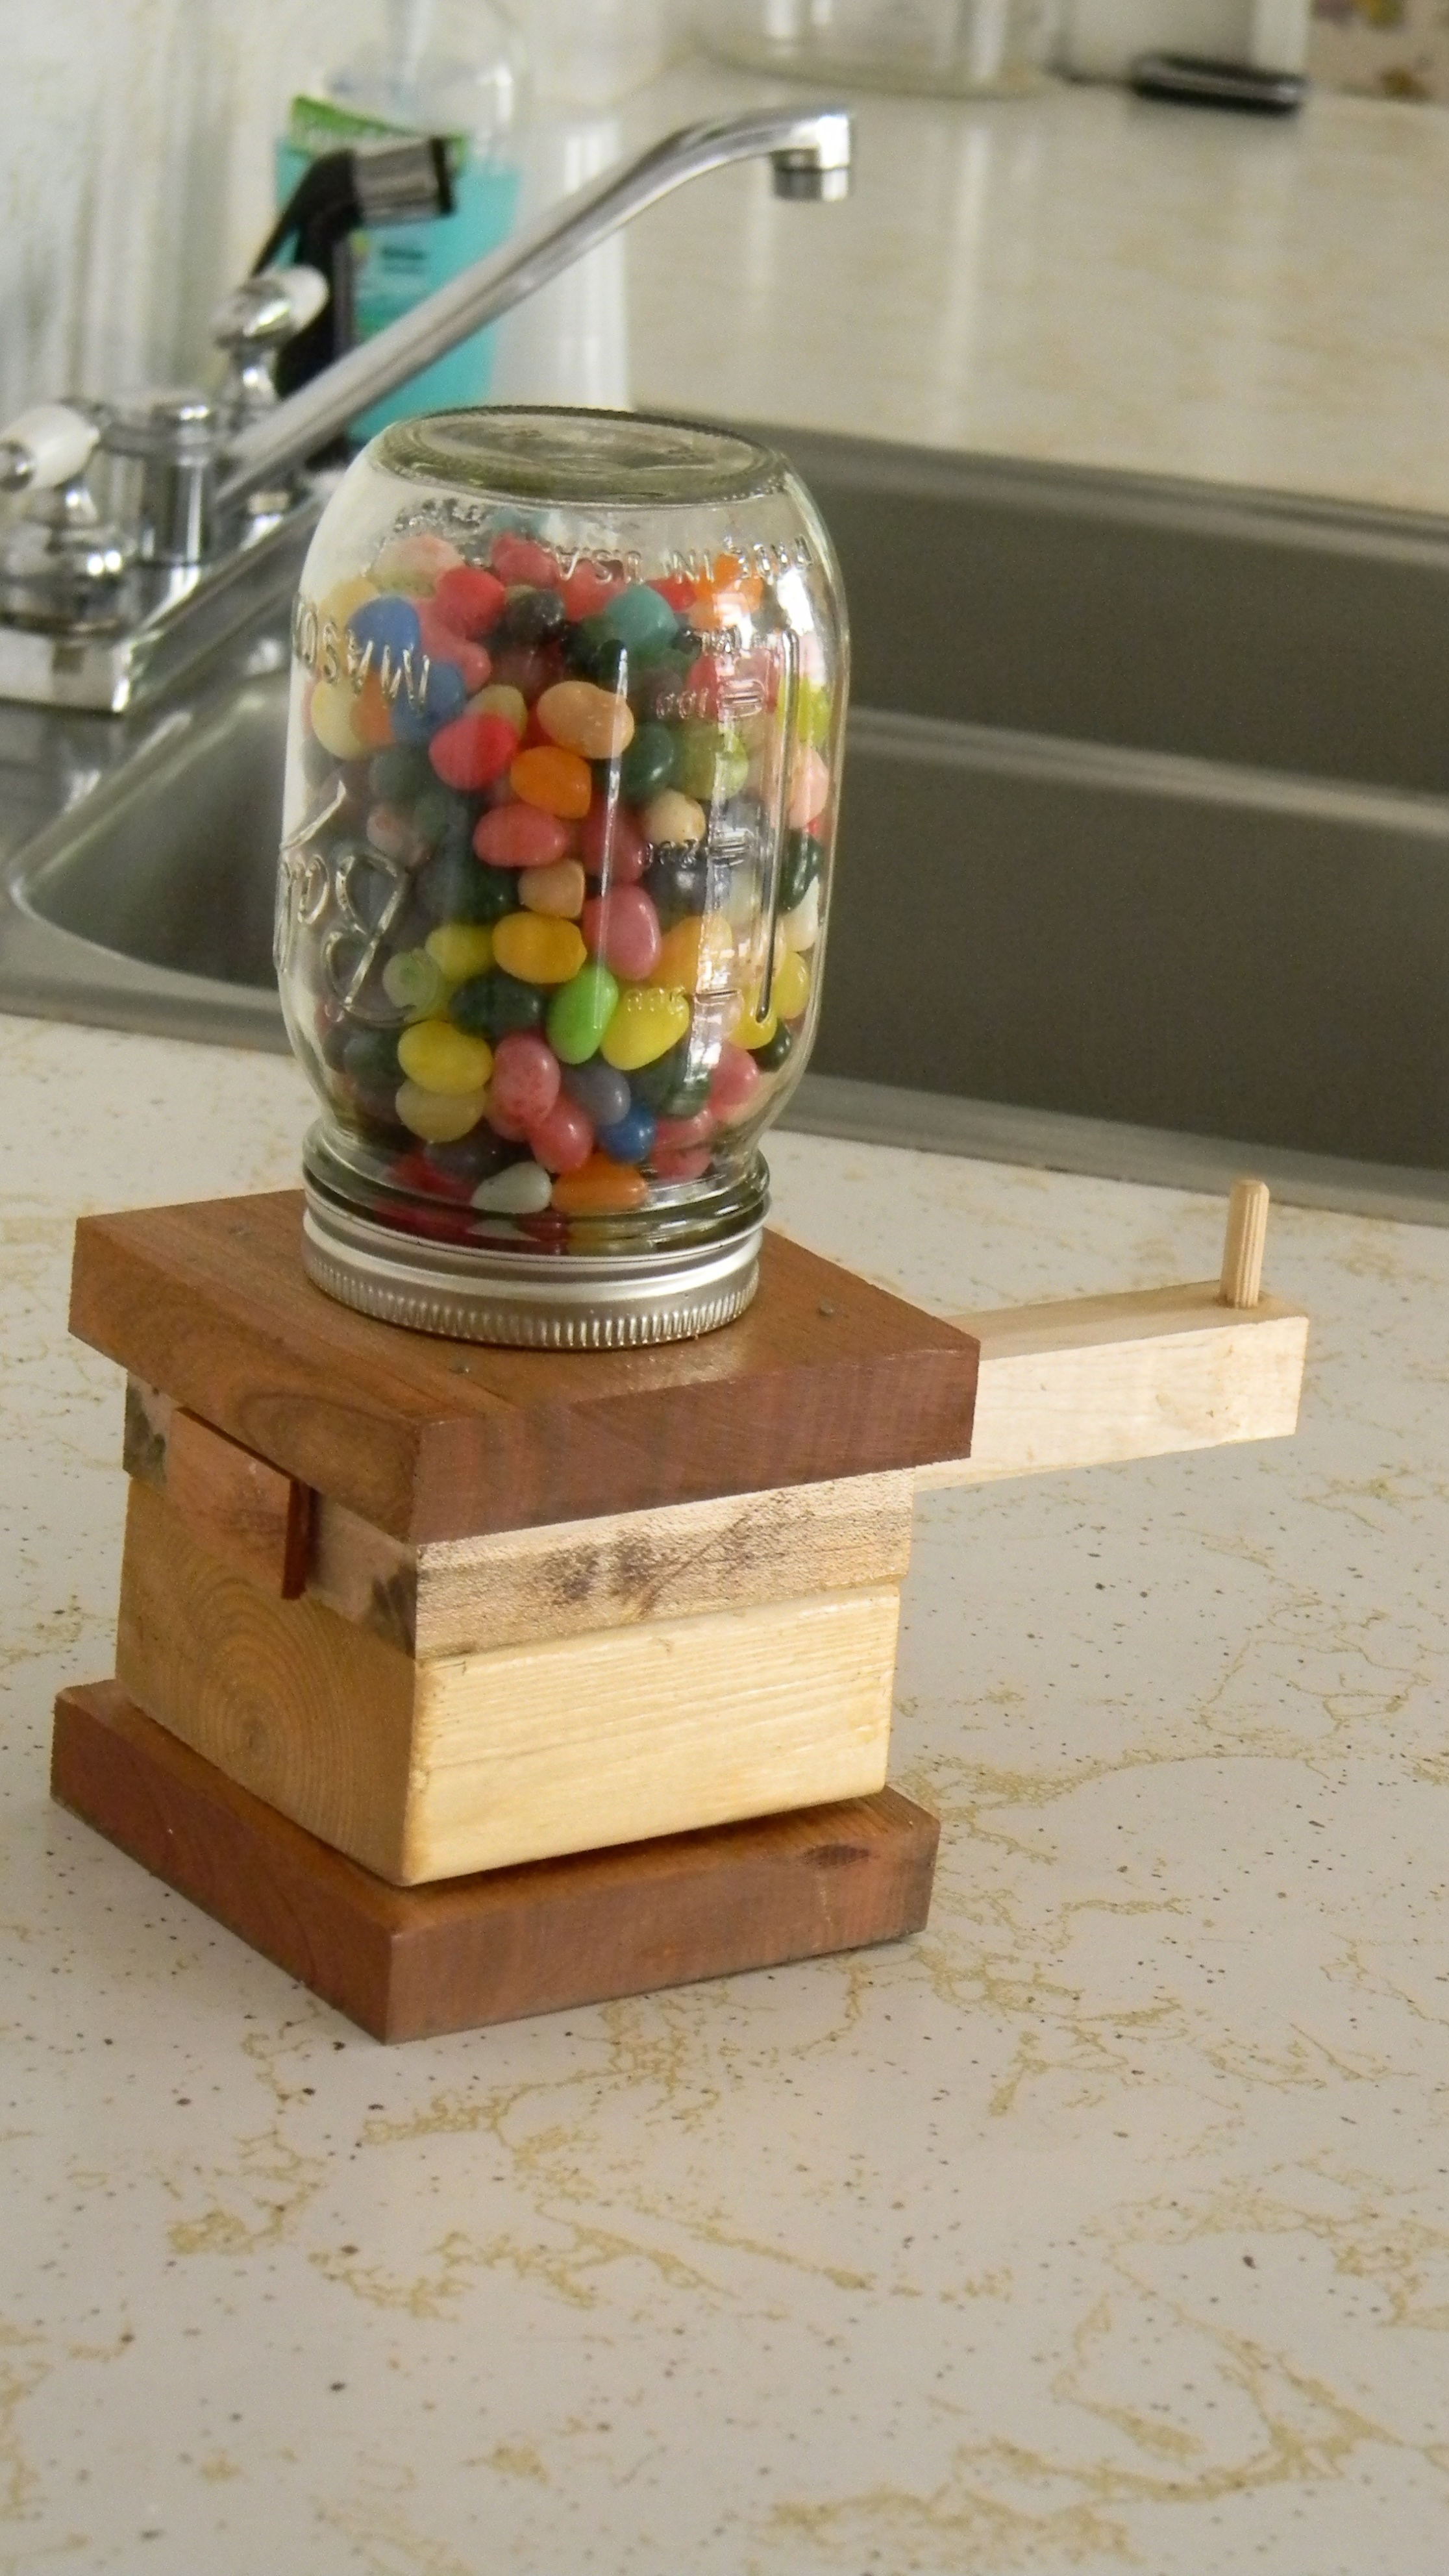 The Awesomest Jelly Bean Dispenser Ever